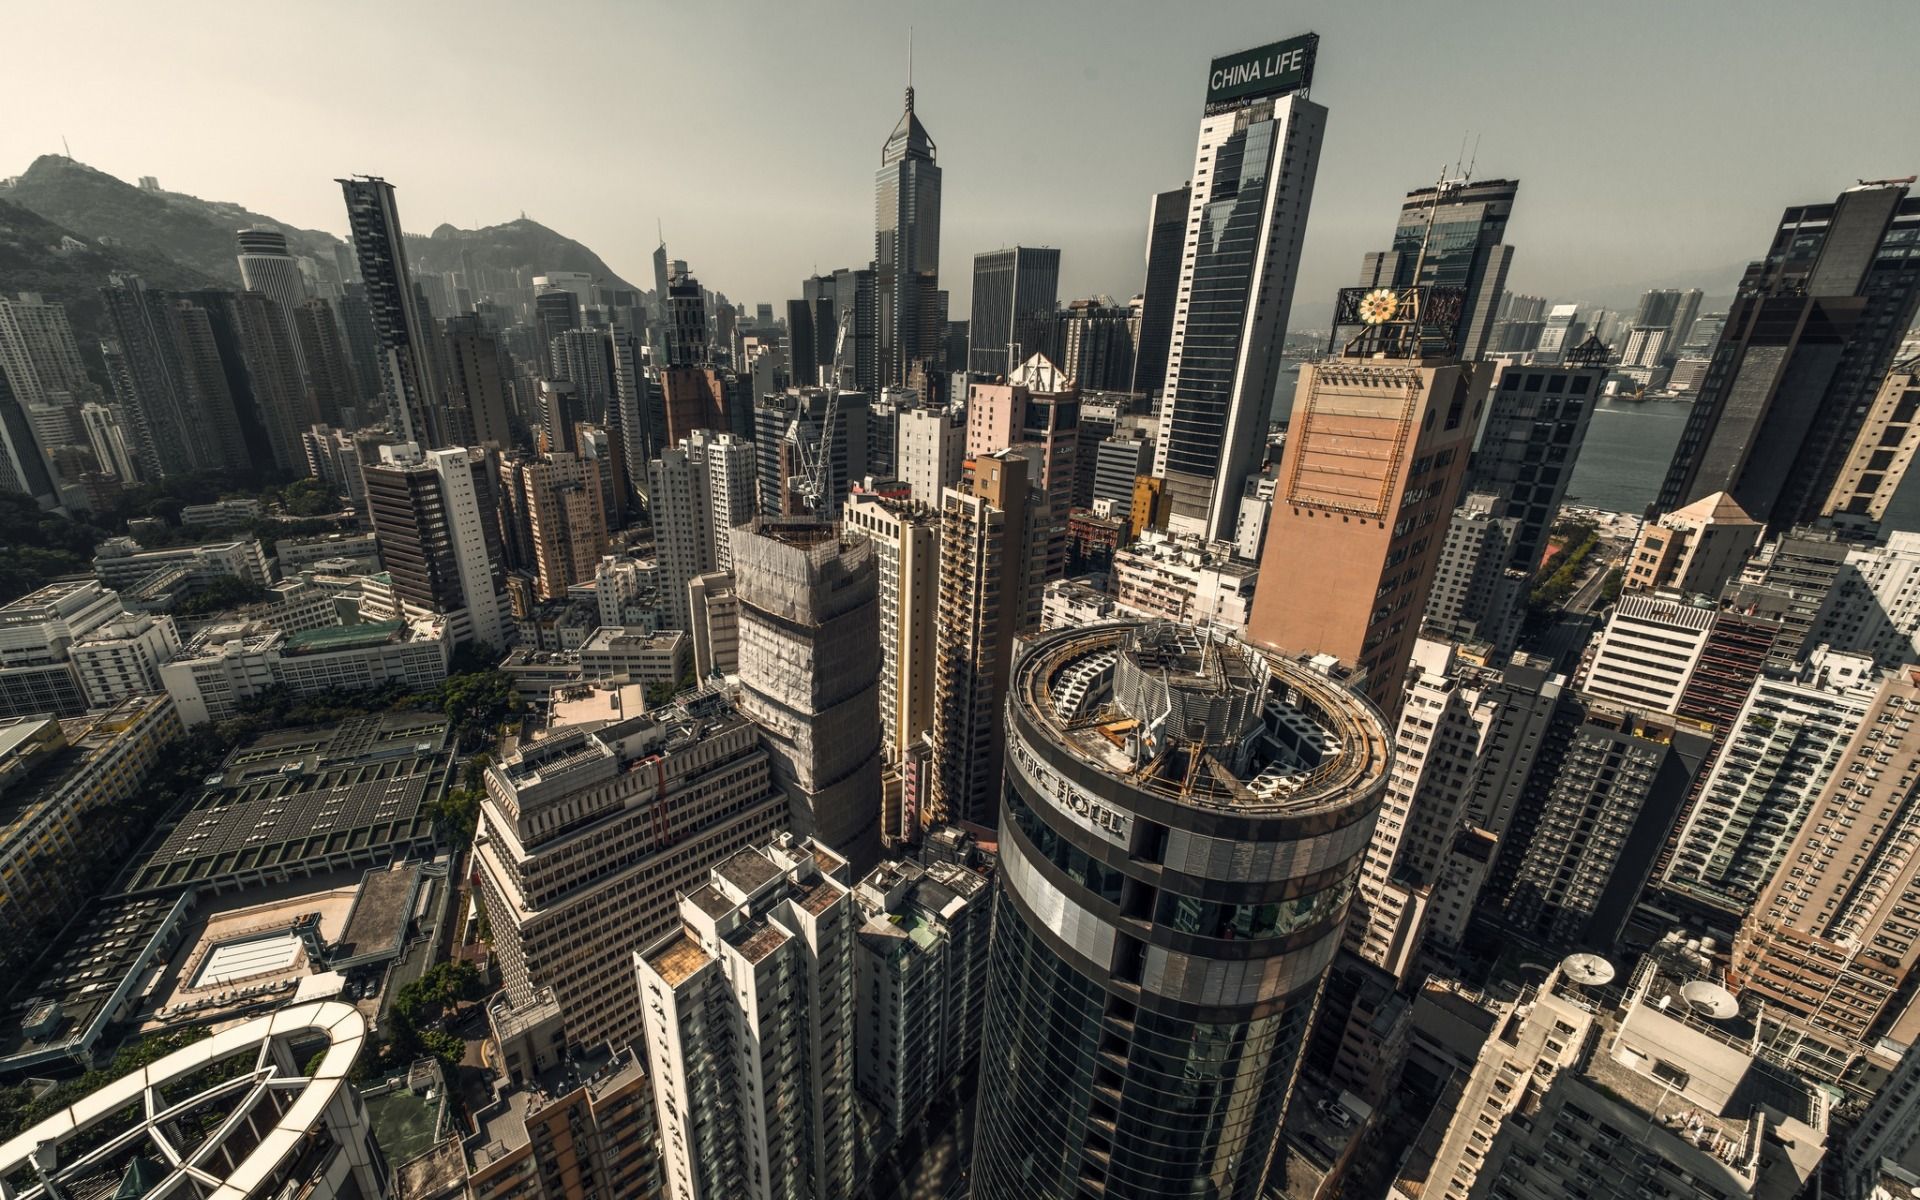 Download wallpaper Hong Kong, Wan Chai, modern architecture, skyscrapers, business centers, tall buildings, China for desktop with resolution 1920x1200. High Quality HD picture wallpaper